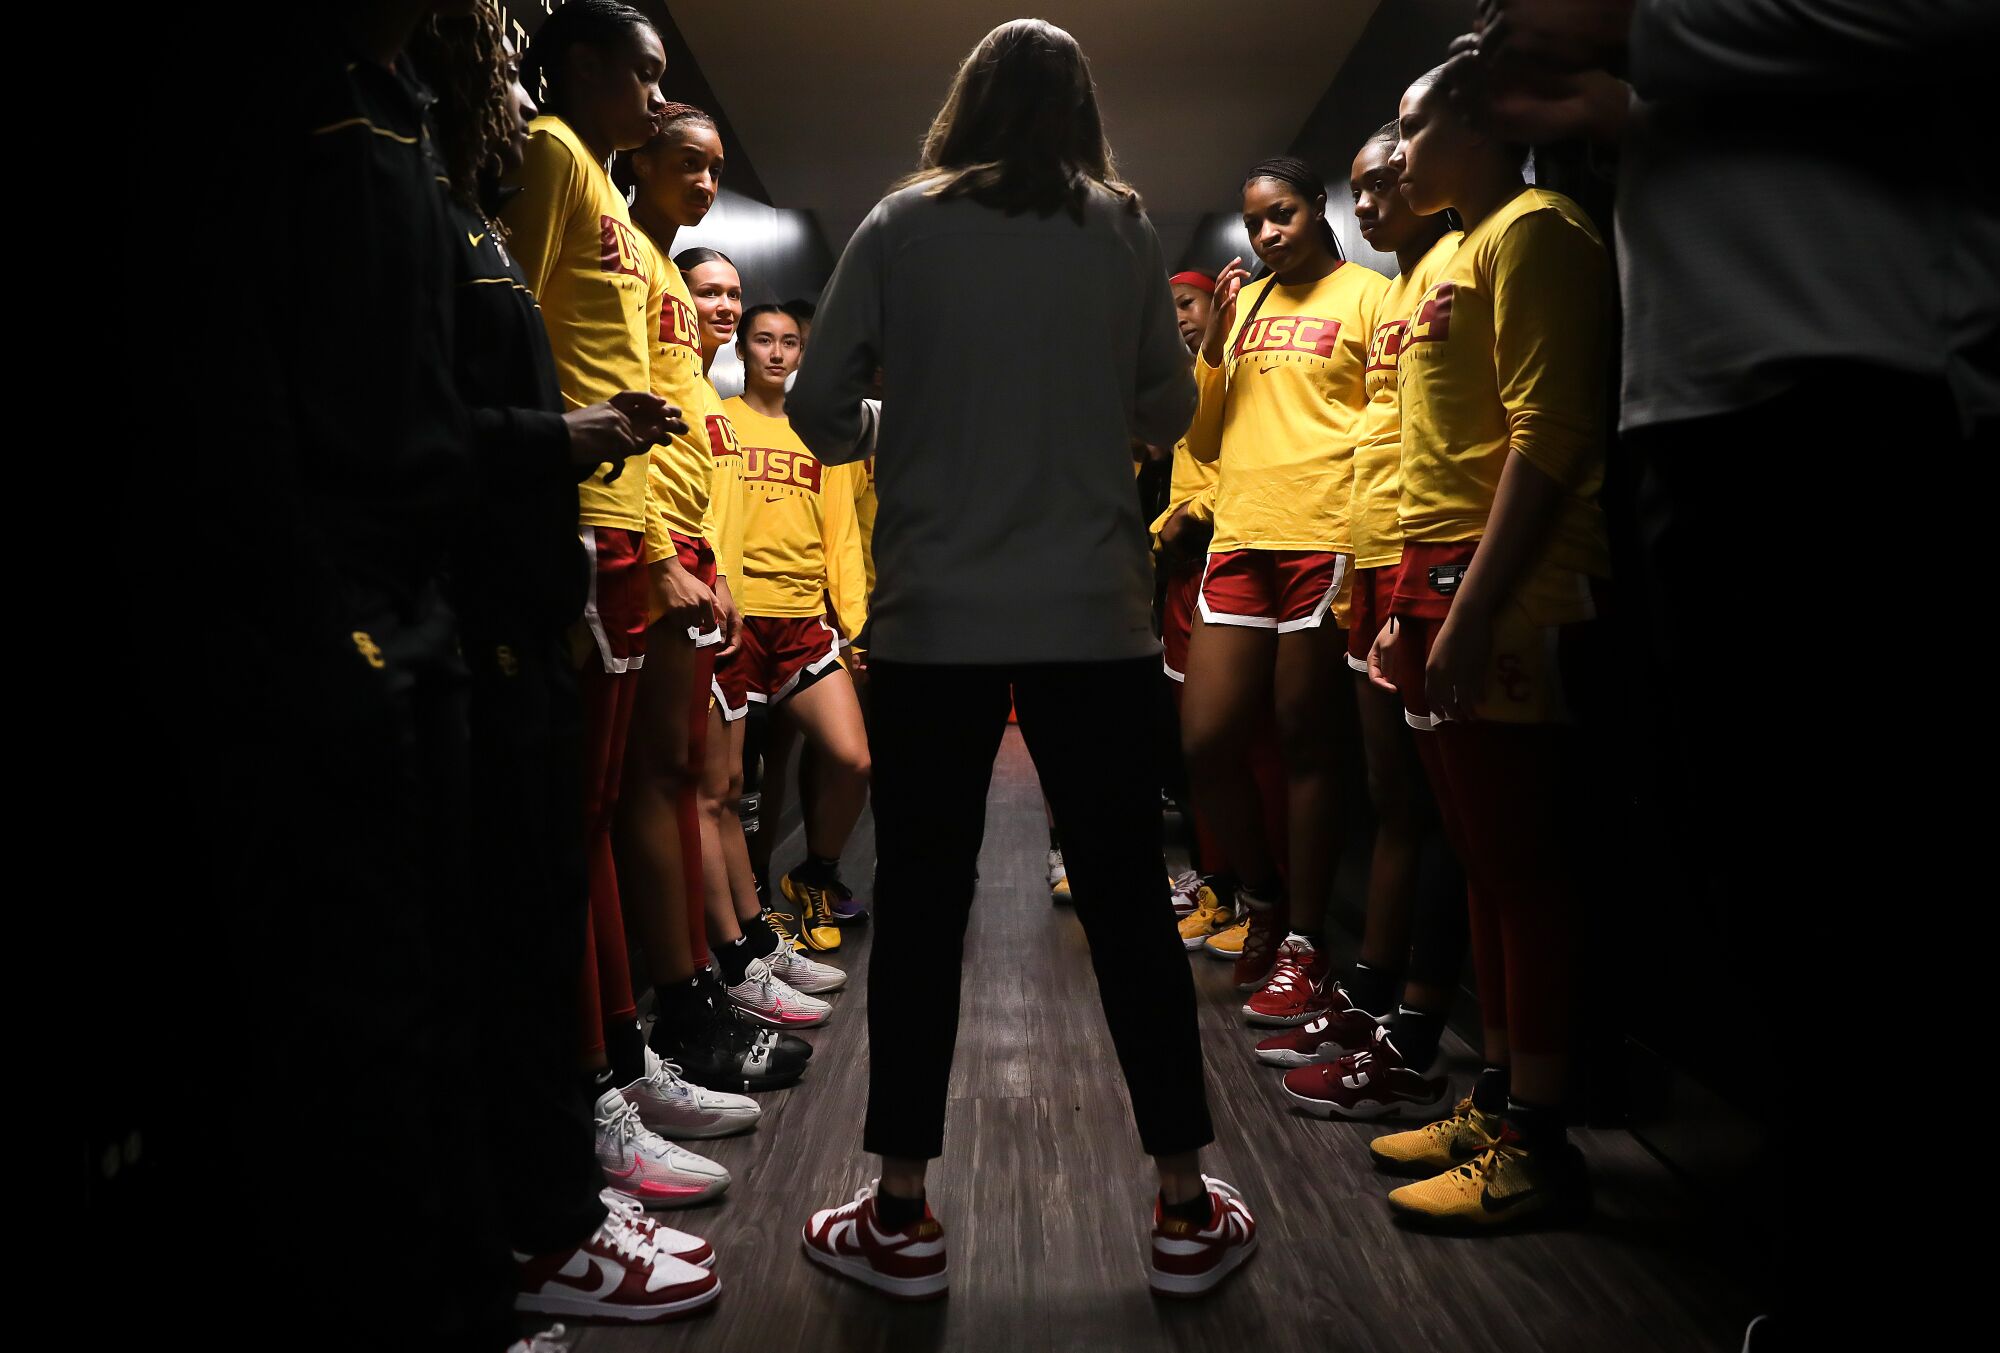 Lindsay Gottlieb talks to her players before a game against Colorado.